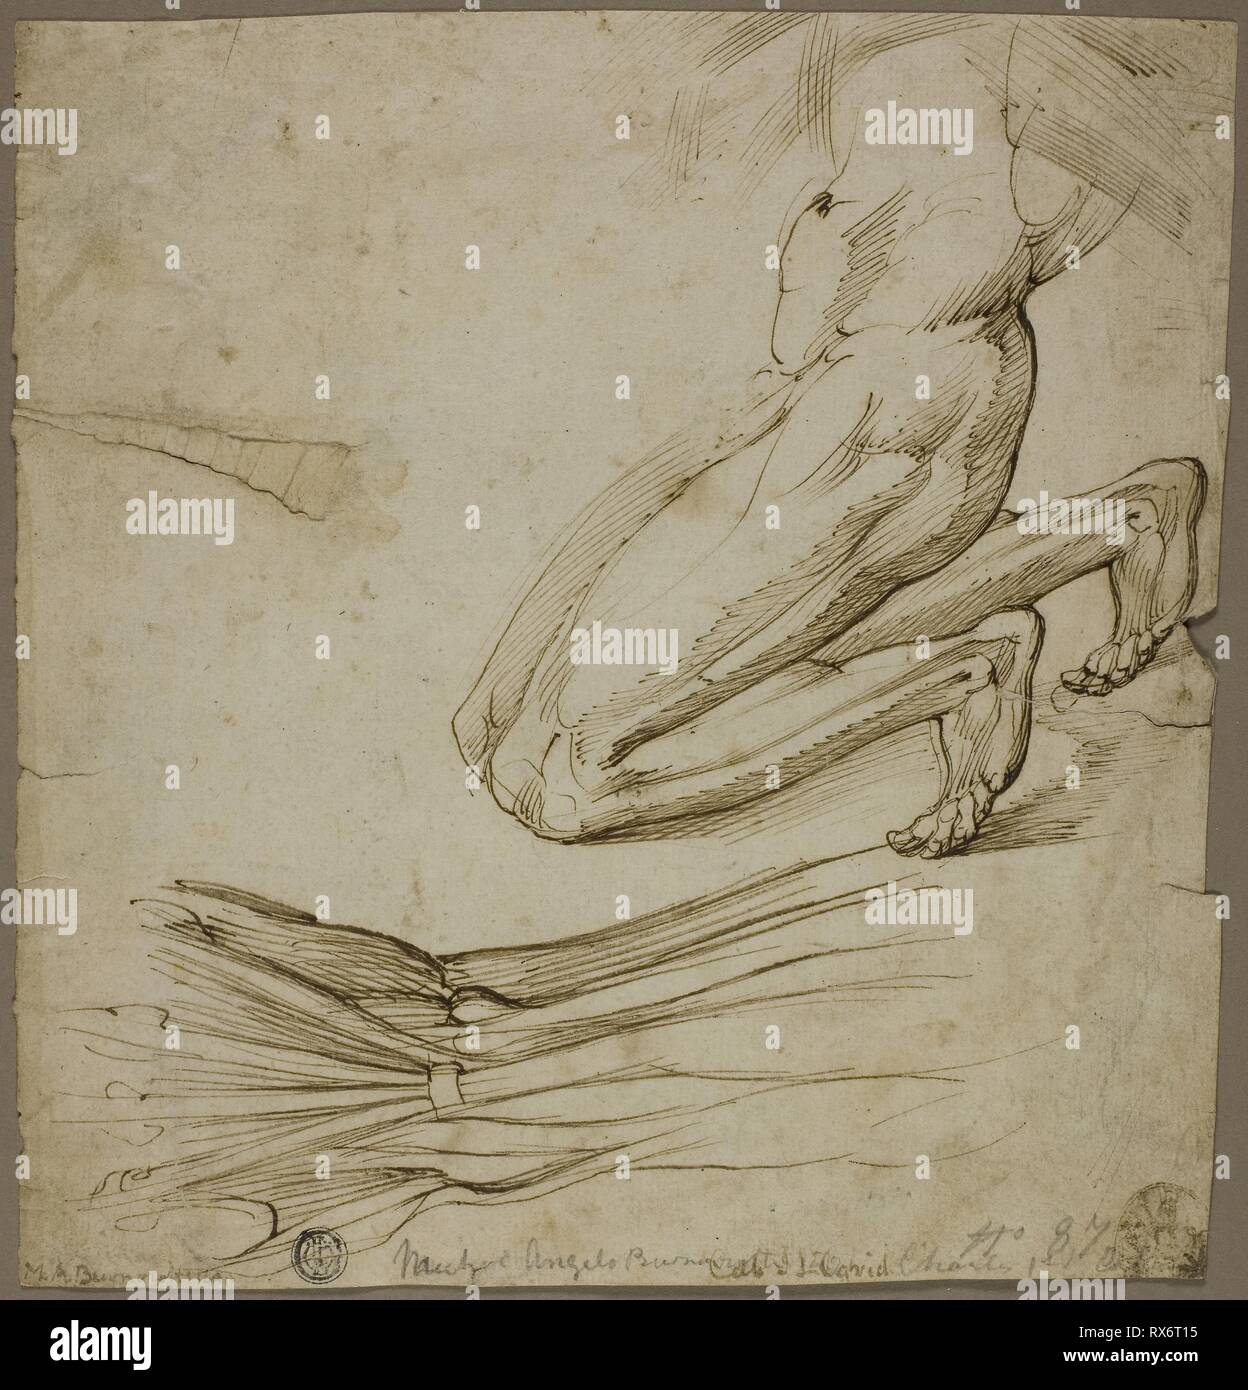 Anatomical Study and Sketch of Kneeling Figure. Follower of Michelangelo Buonarroti; Italian, 1475-1564. Date: 1475-1564. Dimensions: 228 x 219 mm (max.). Pen and brown ink on ivory laid paper. Origin: Italy. Museum: The Chicago Art Institute. Stock Photo